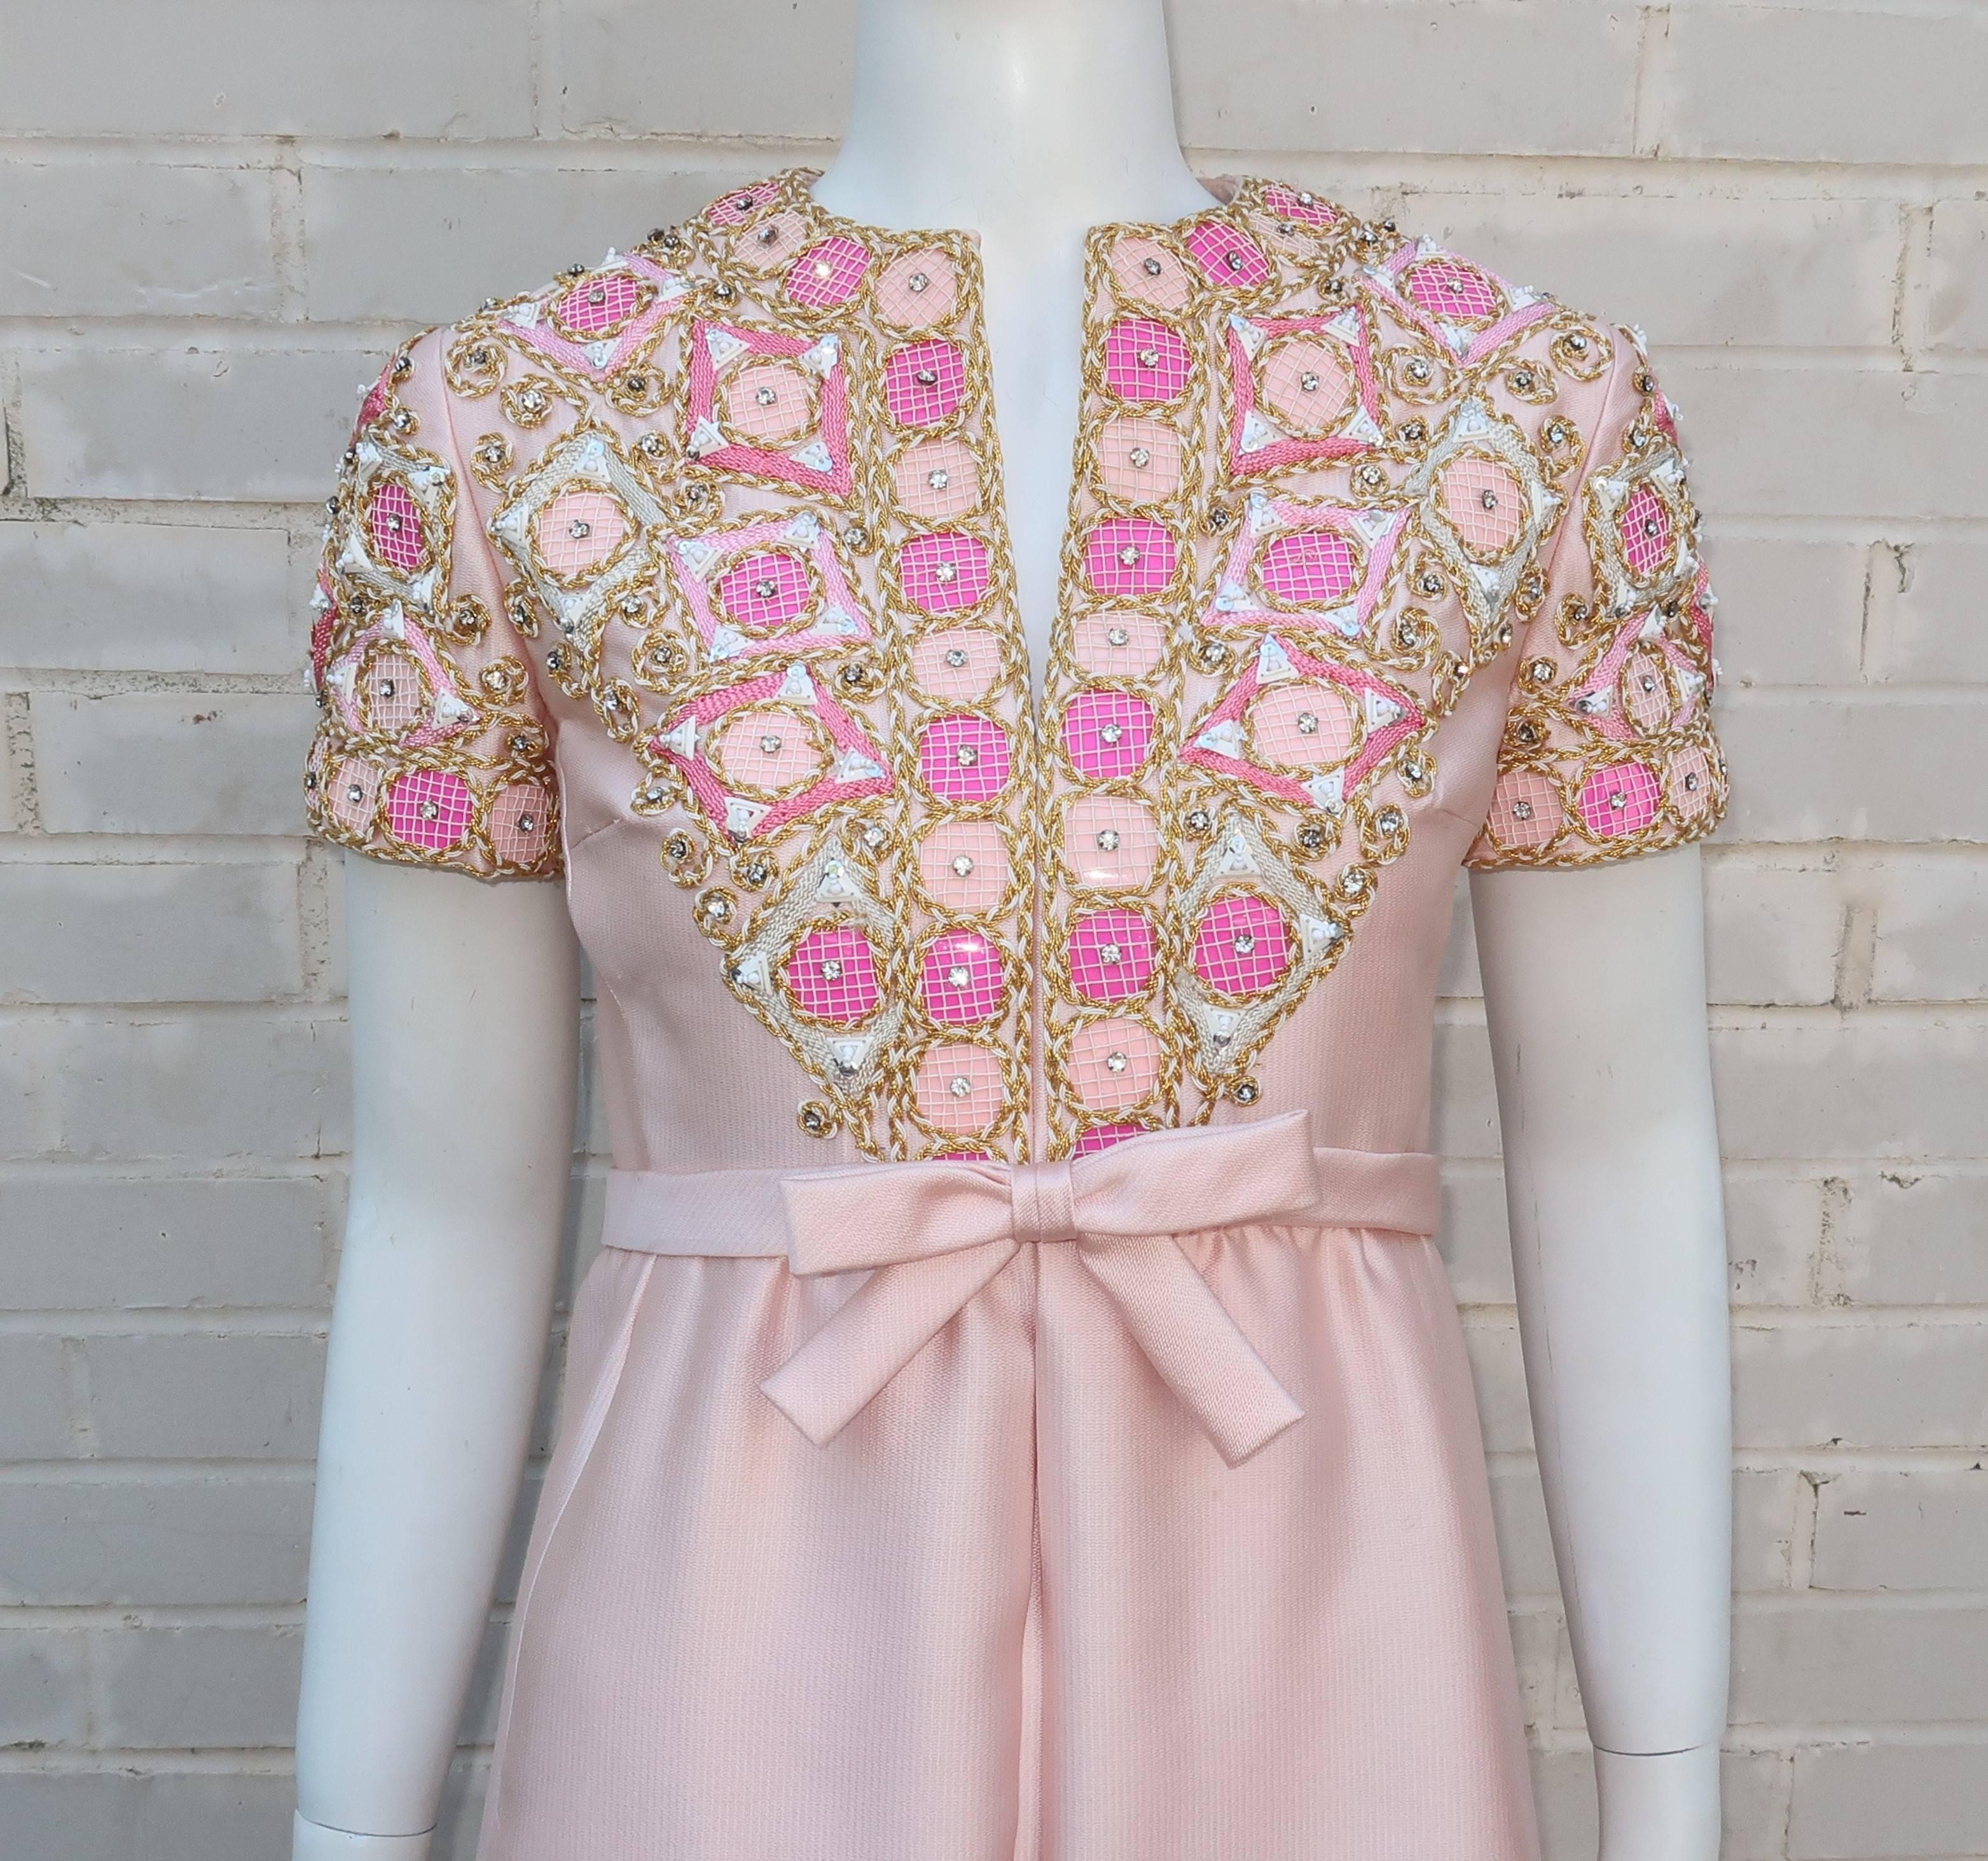 Pretty in pink!  And how!  This fabulous 1960’s Elinor Simmons design for Malcolm Starr incorporates both a girlish innocence with a mod aesthetic so wonderfully typical of the era.  The dress is designed with a modified empire waist in a heavy silk